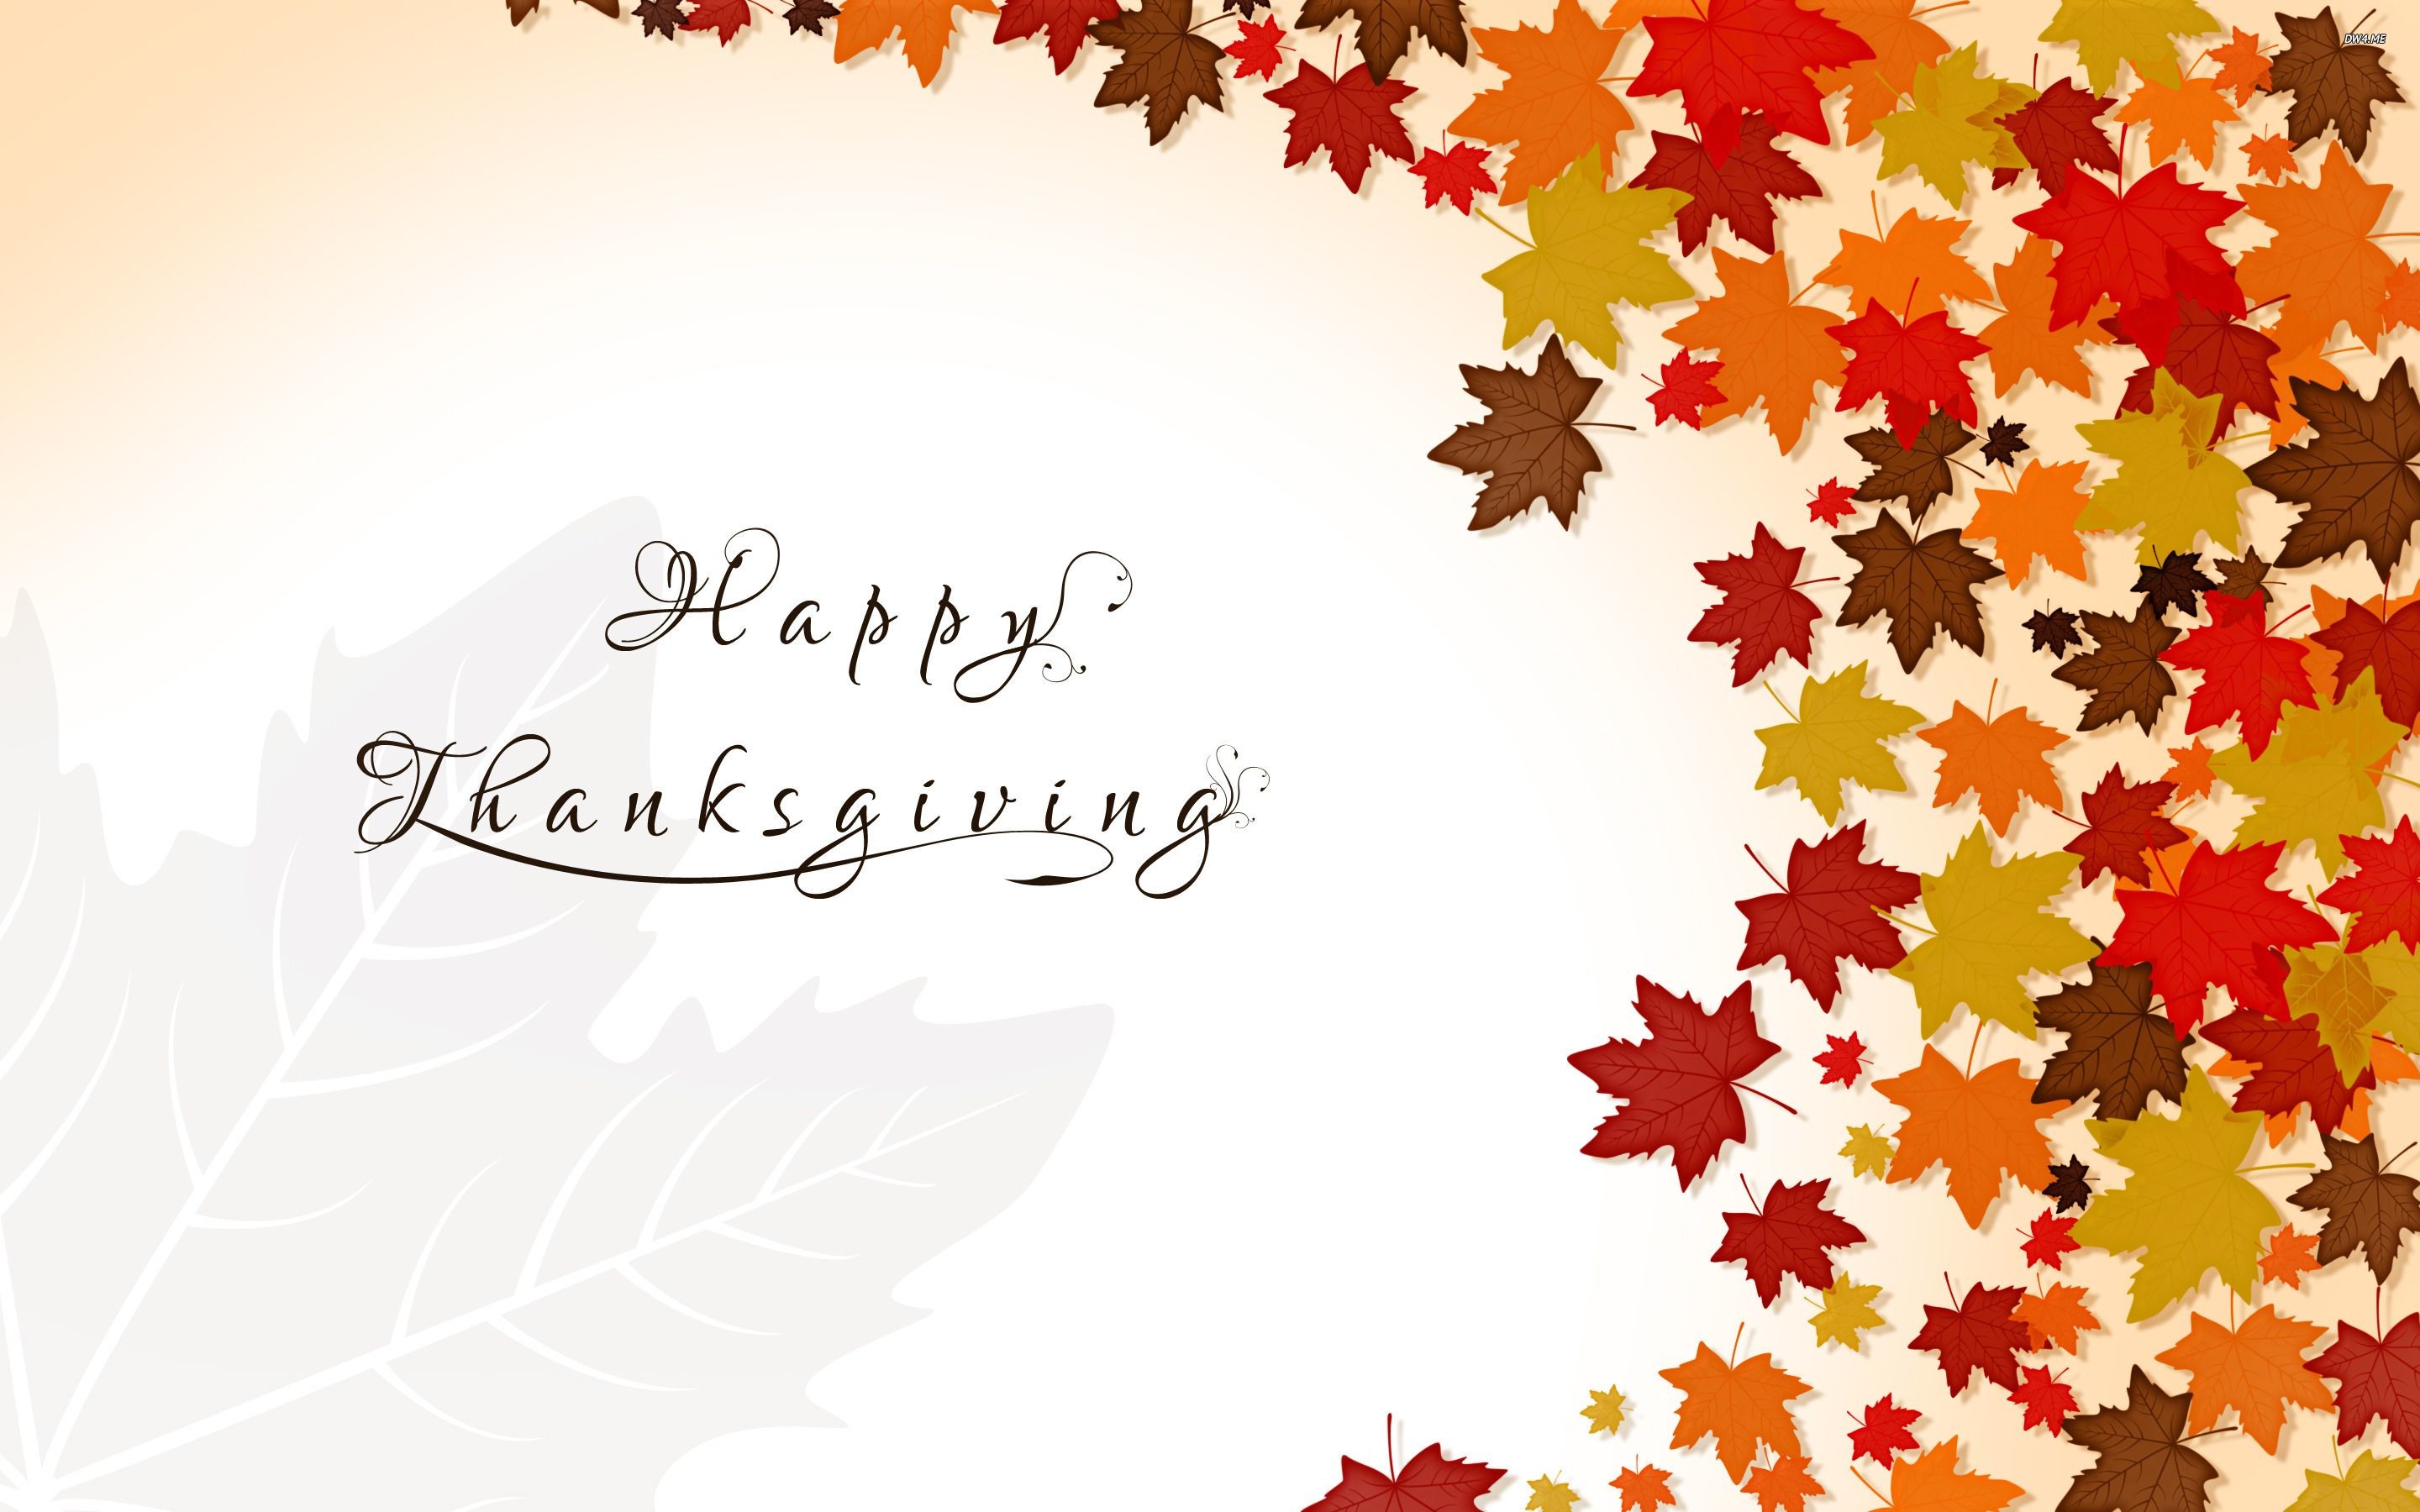 A thanksgiving wallpaper with autumn leaves and a white background - Thanksgiving